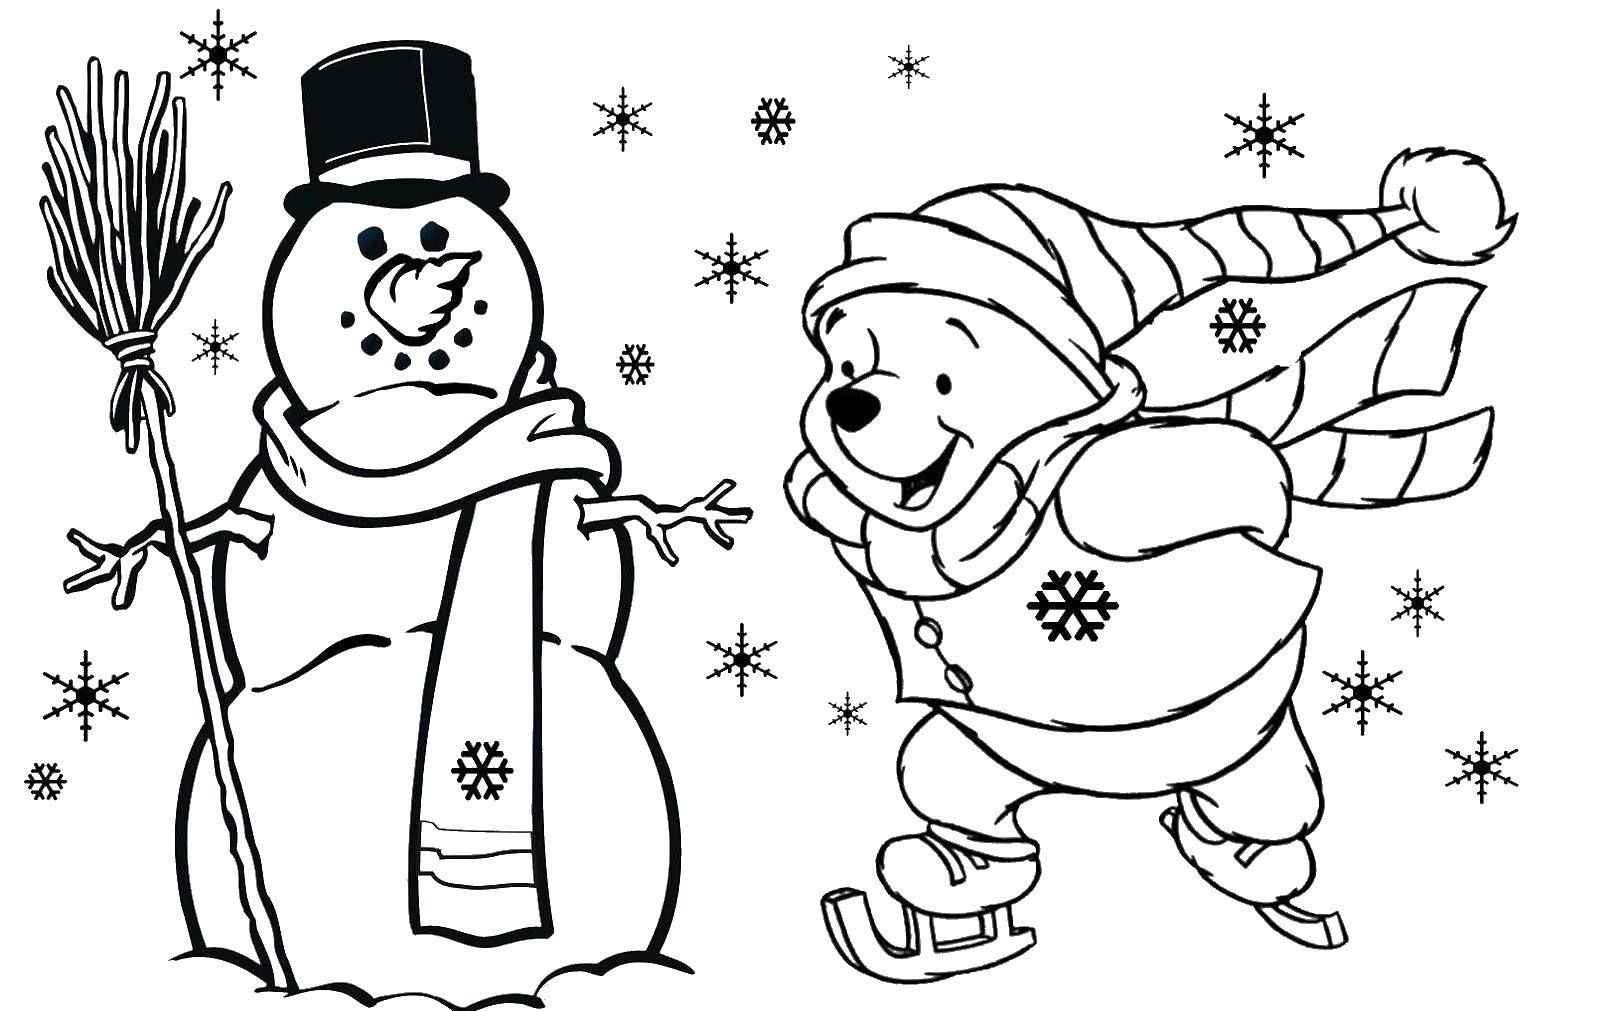 Coloring Winnie the Pooh and snowman. Category Christmas. Tags:  snowman, broom, Winnie the Pooh.